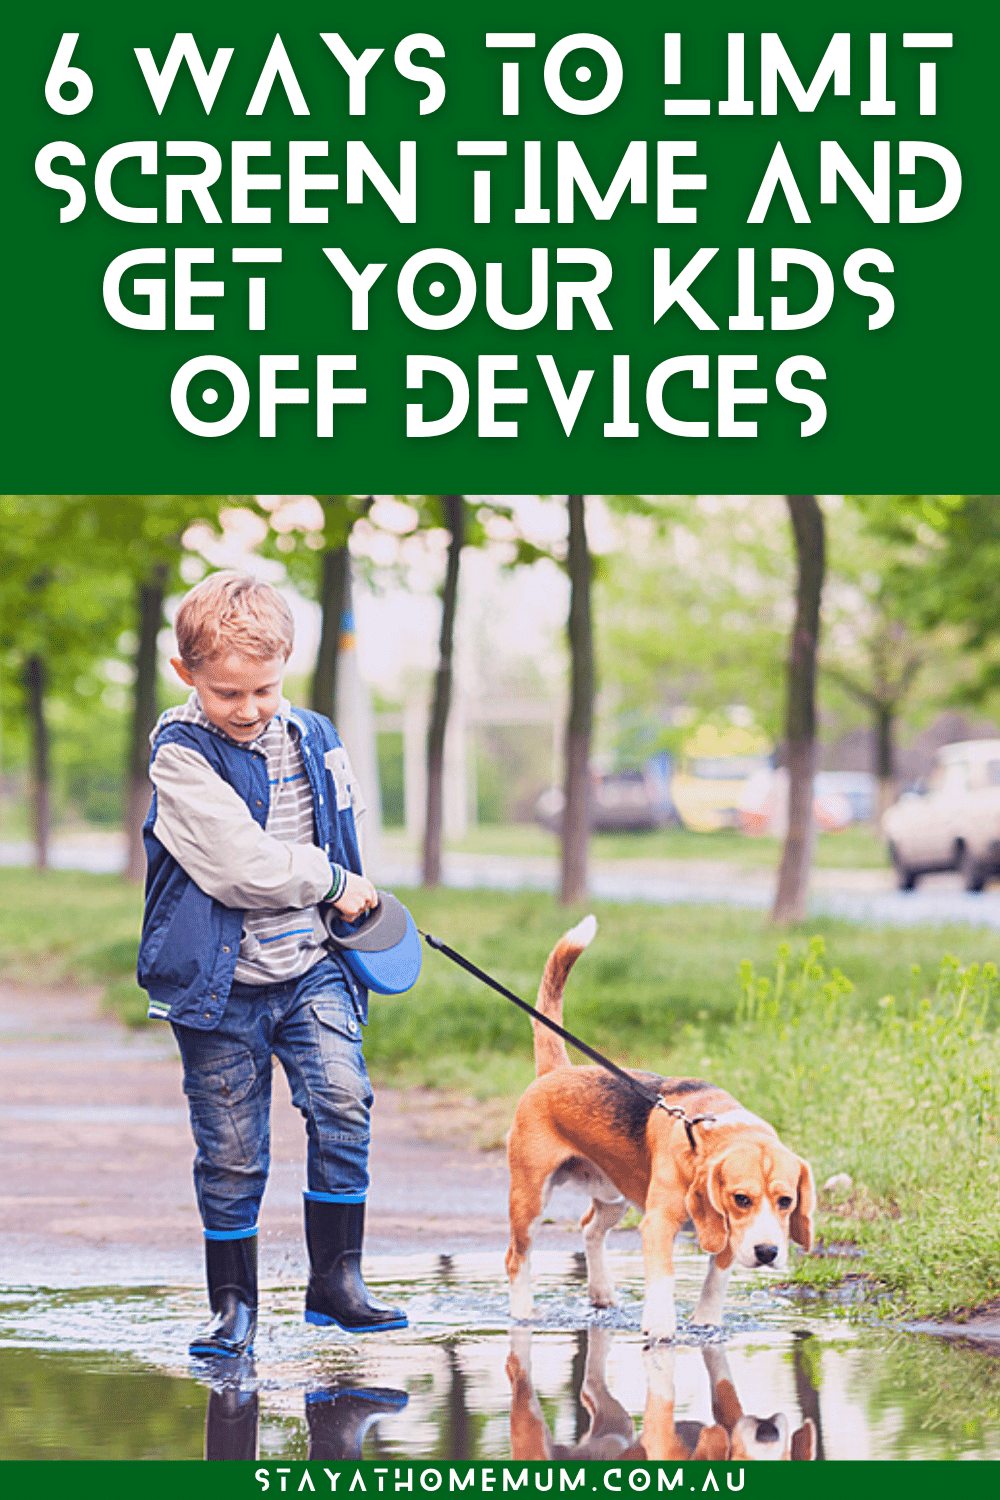 6 Ways To Limit Screen Time And Get Your Kids Off Devices | Stay At Home Mum